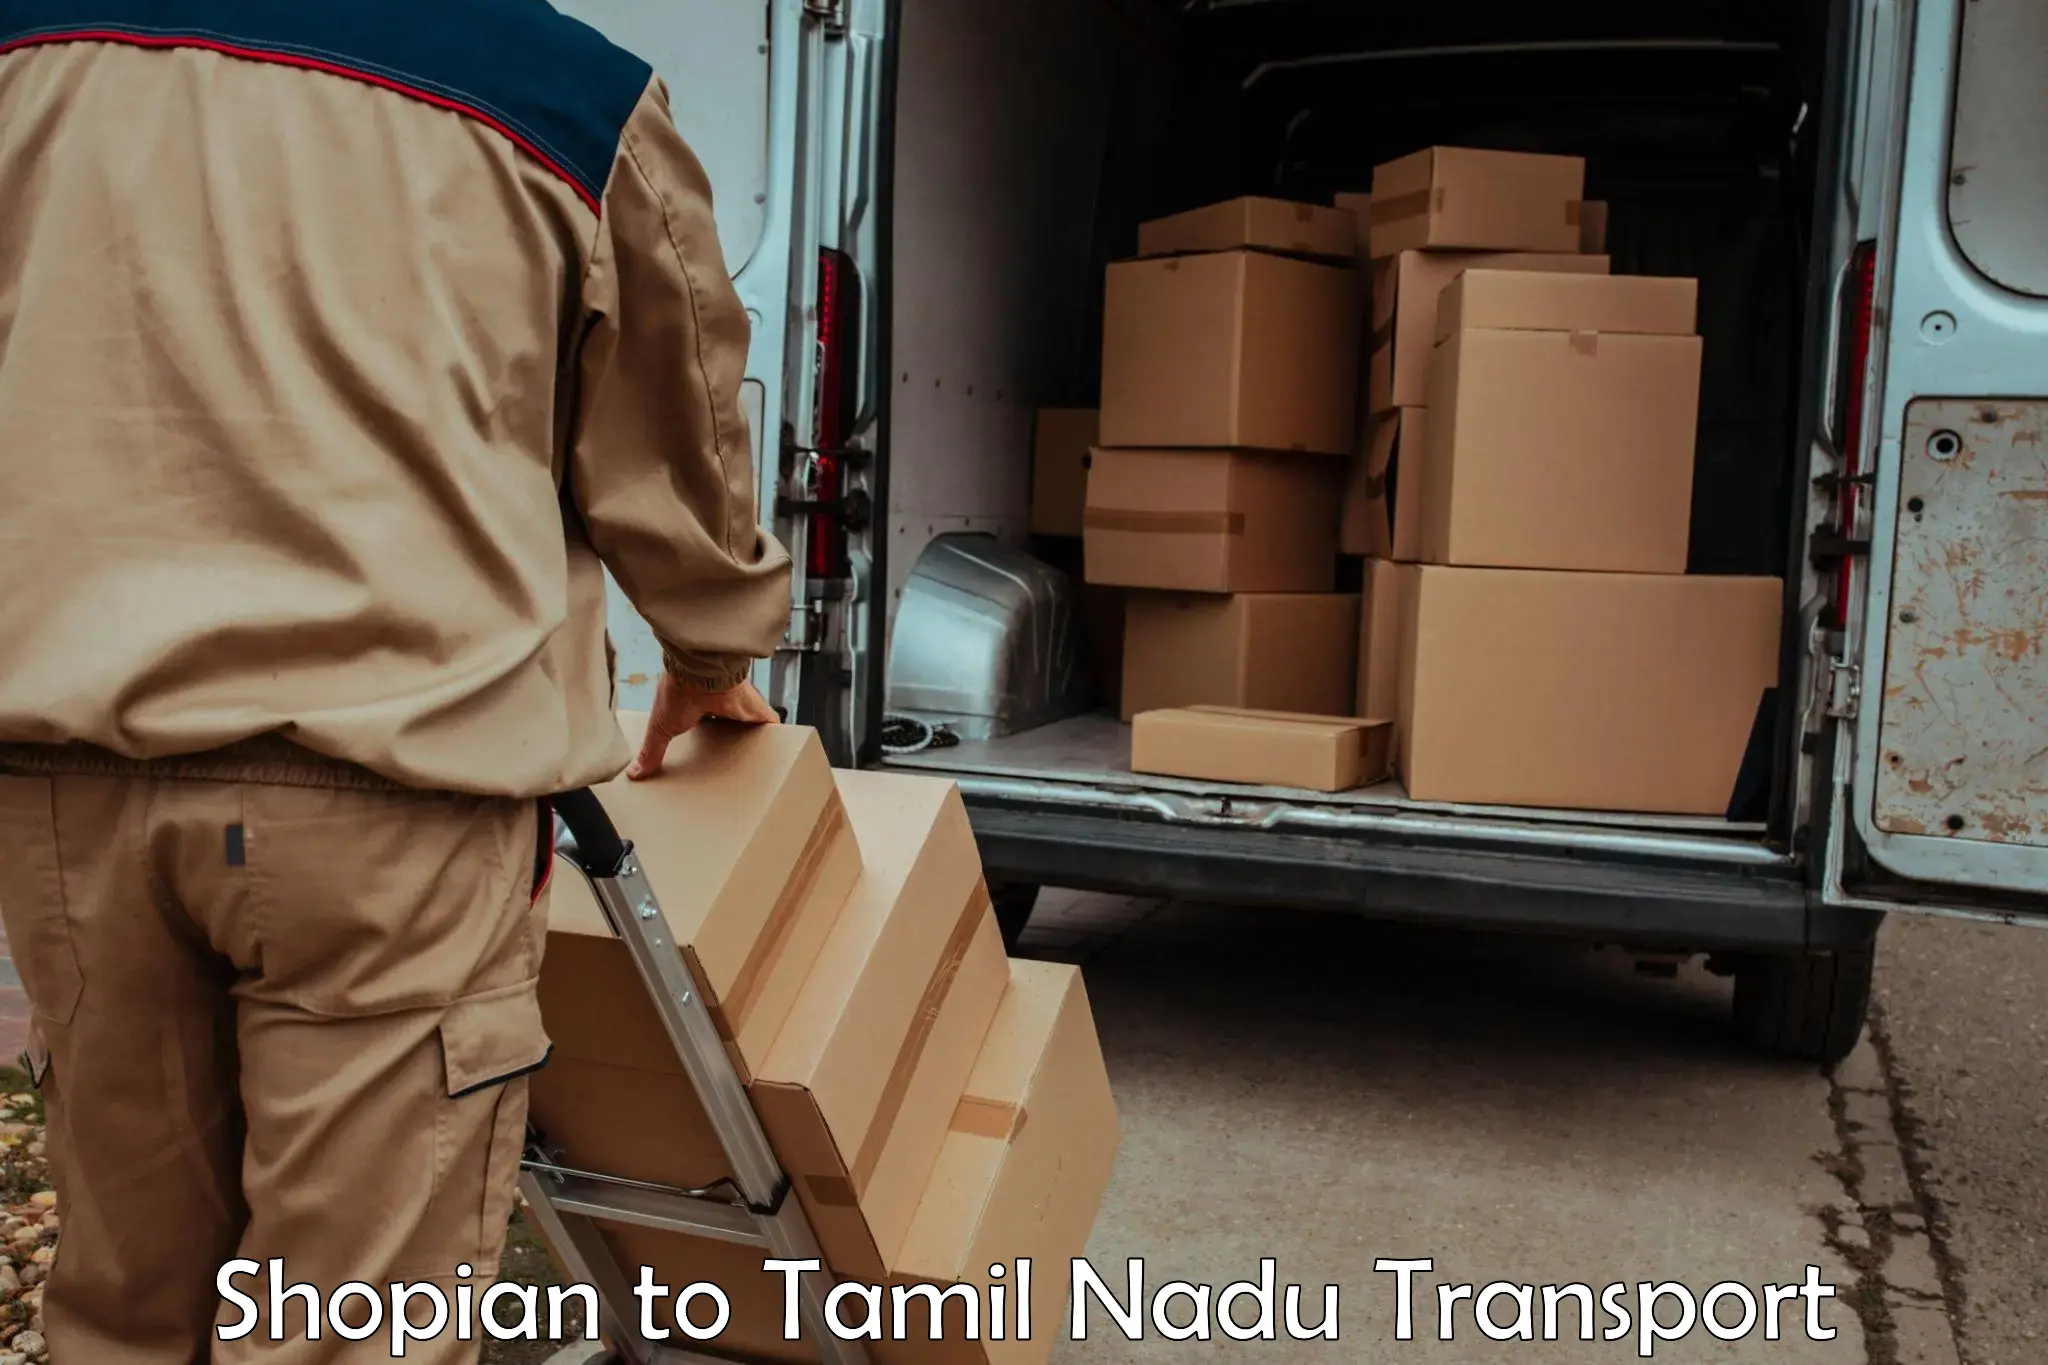 Cargo transport services Shopian to Sri Ramachandra Institute of Higher Education and Research Chennai